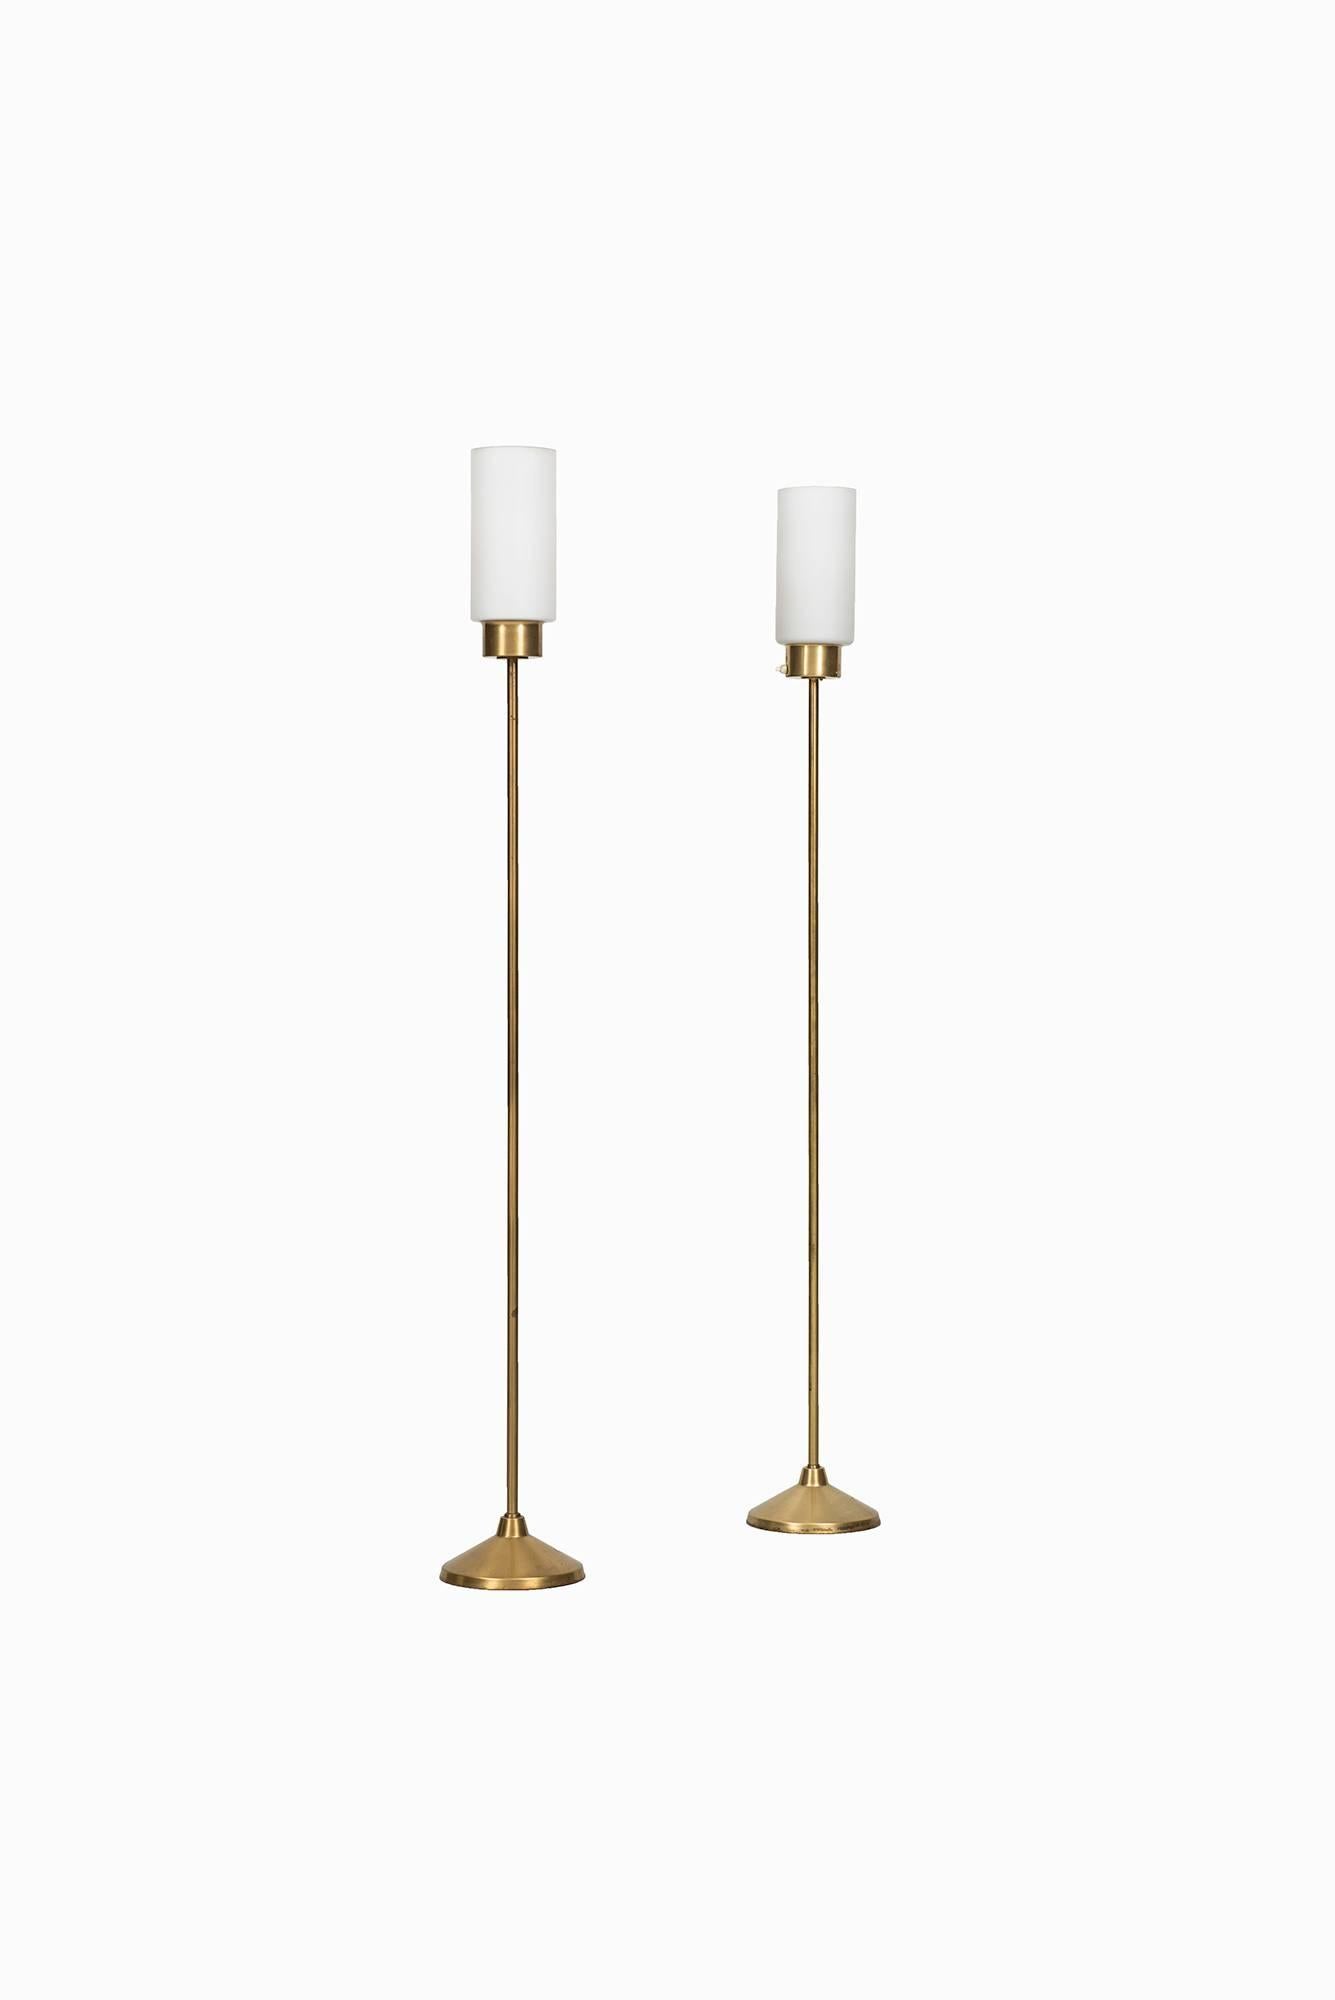 Hans-Agne Jakobsson Floor Lamps in Brass and Glass In Excellent Condition In Limhamn, Skåne län